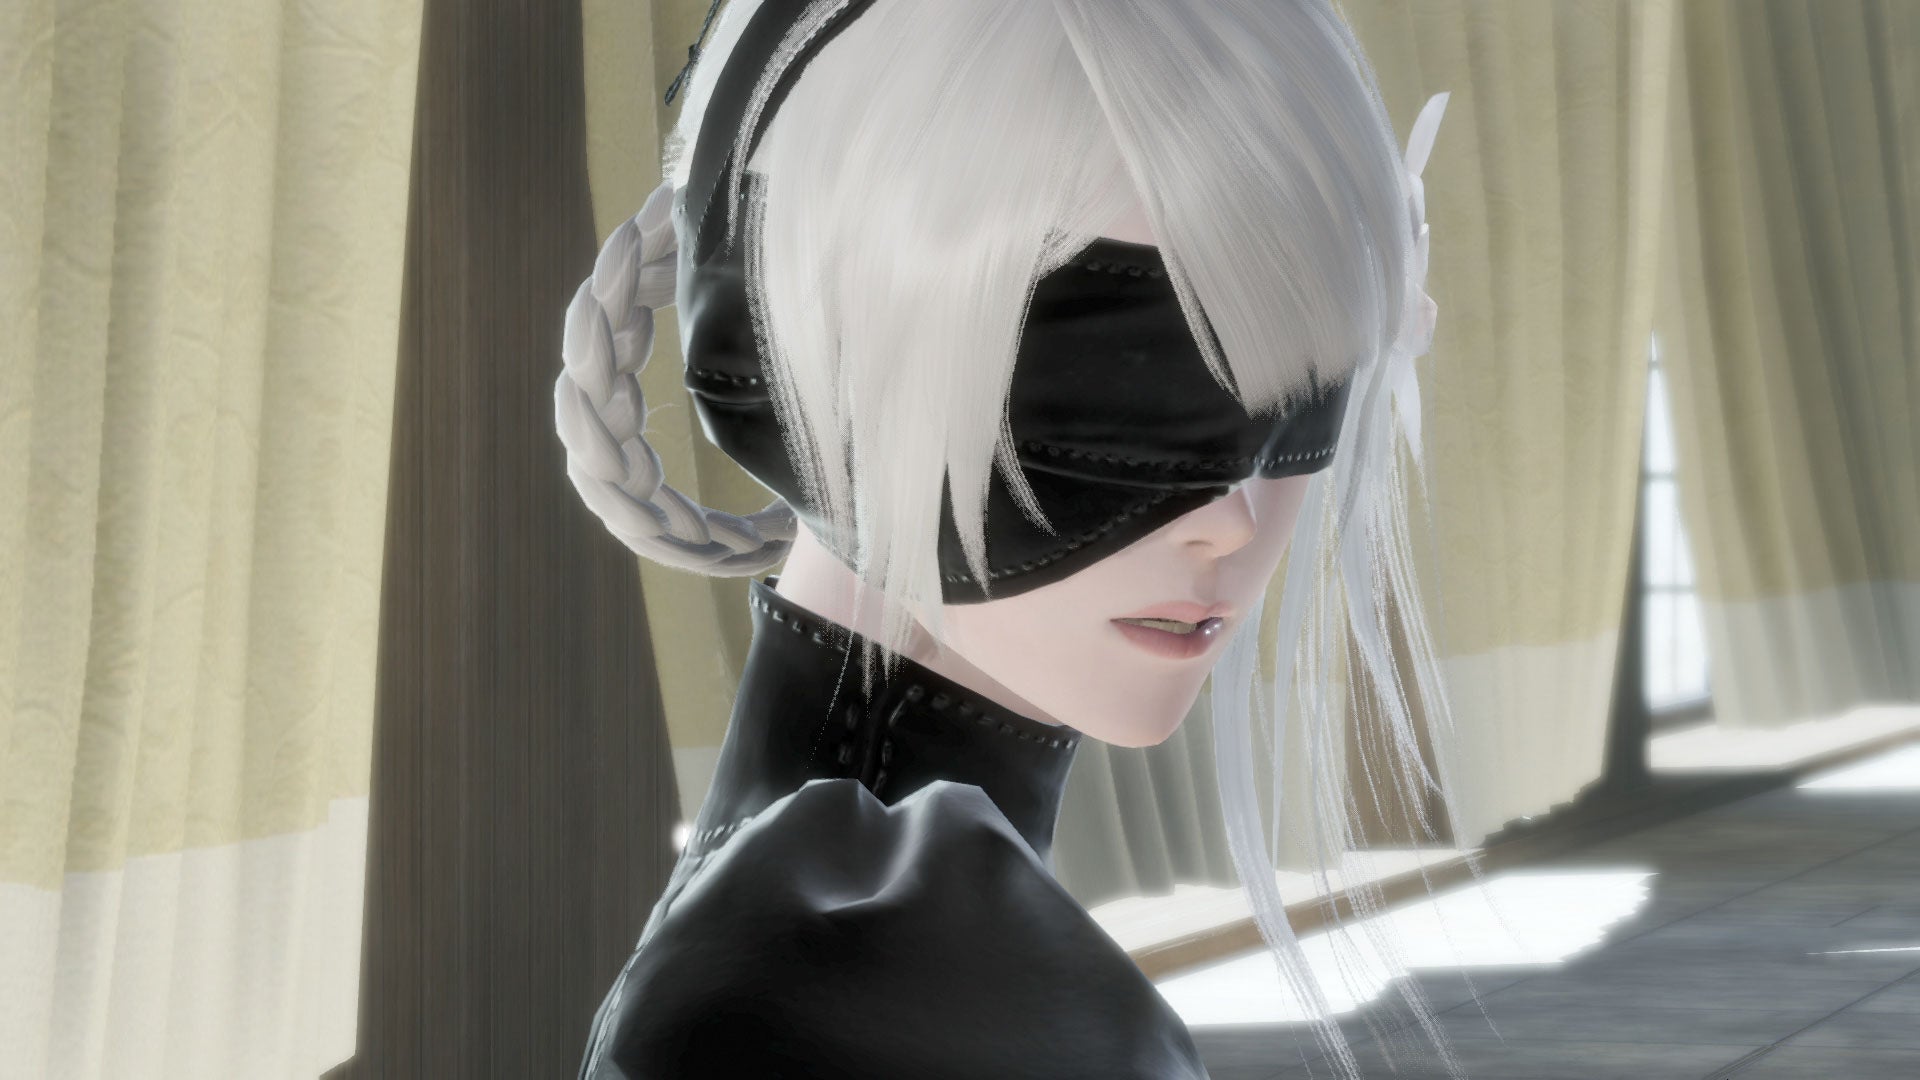 Nier Automata costumes in a screenshot of Nier Replicant's crossover clothing.